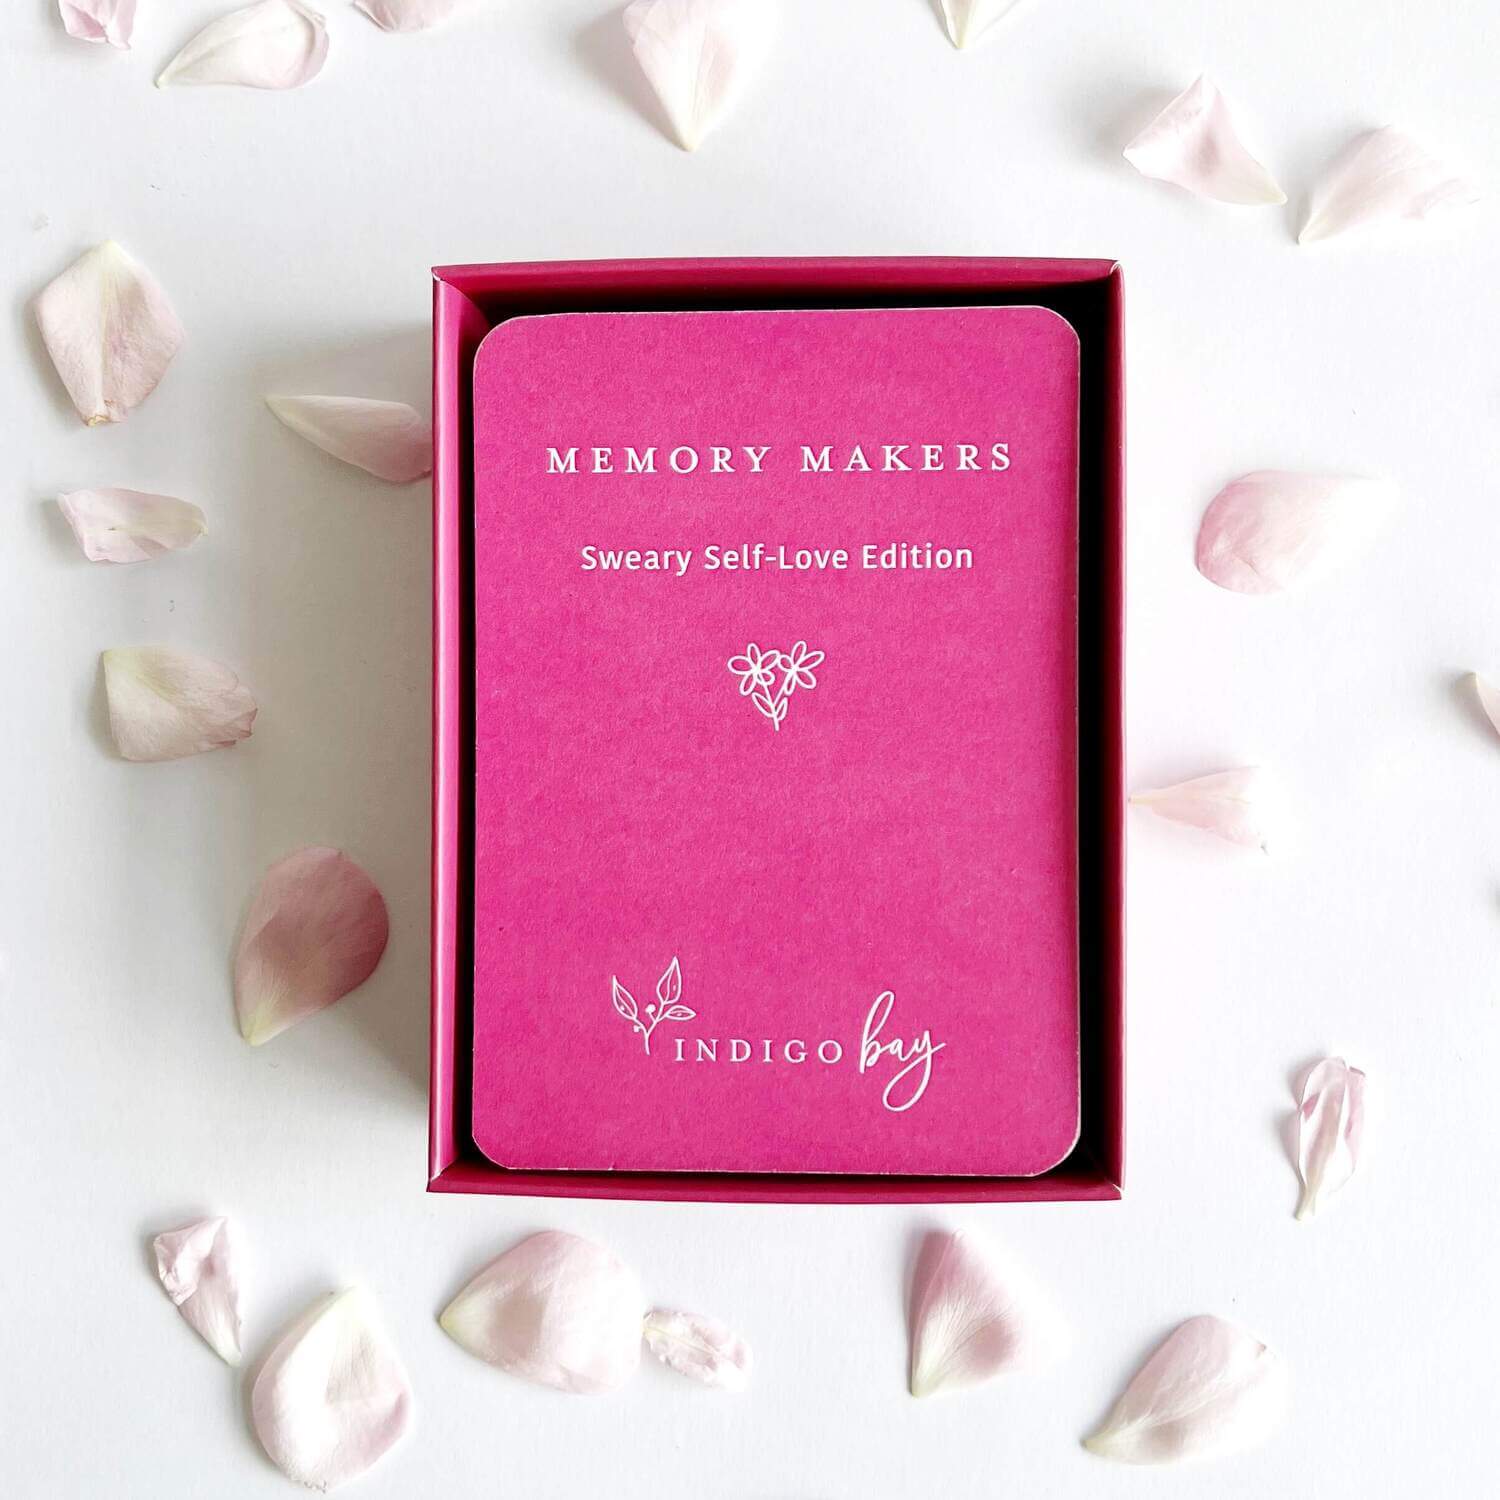 Memory Makers Sweary Self-Love Edition deck in box